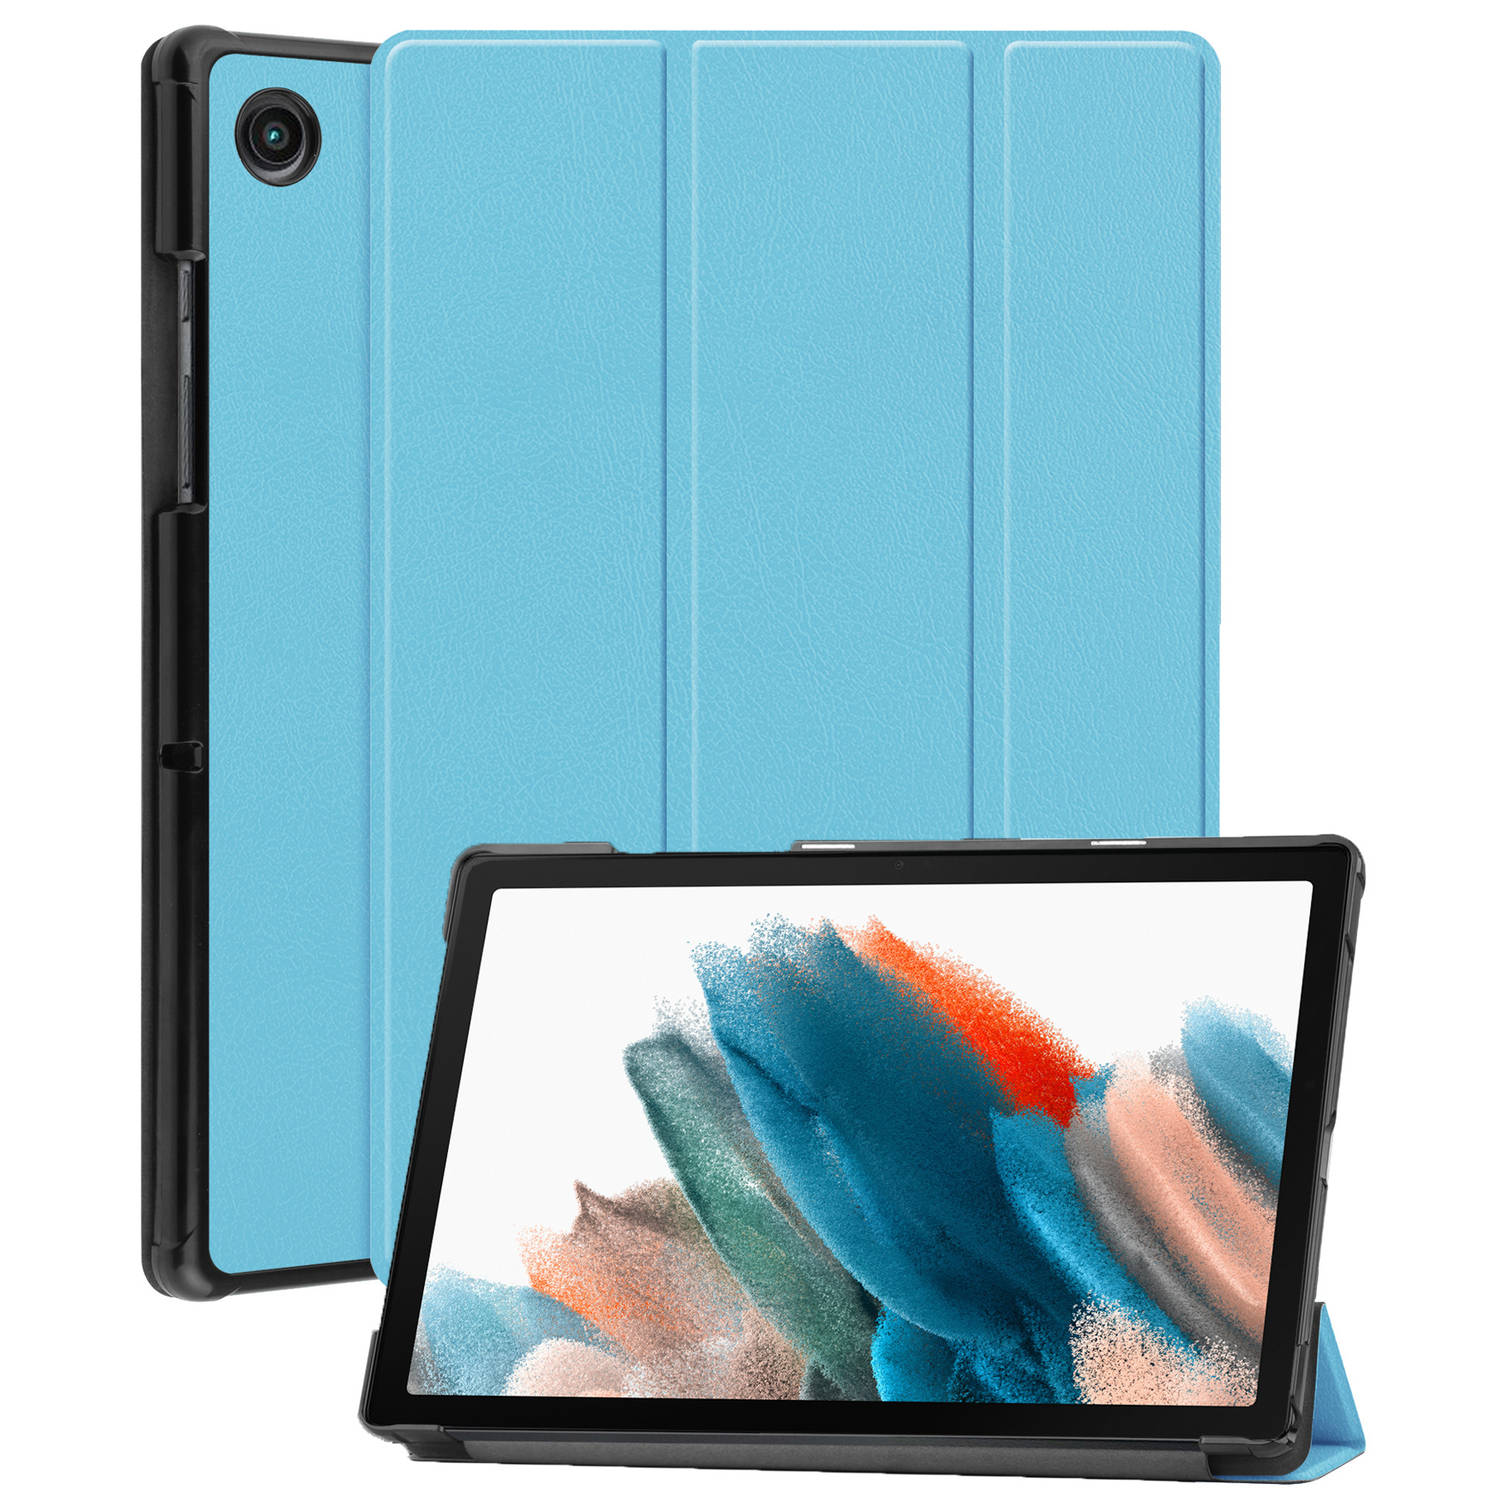 Basey Samsung Galaxy Tab A8 Hoesje Kunstleer Hoes Case Cover Lichtblauw